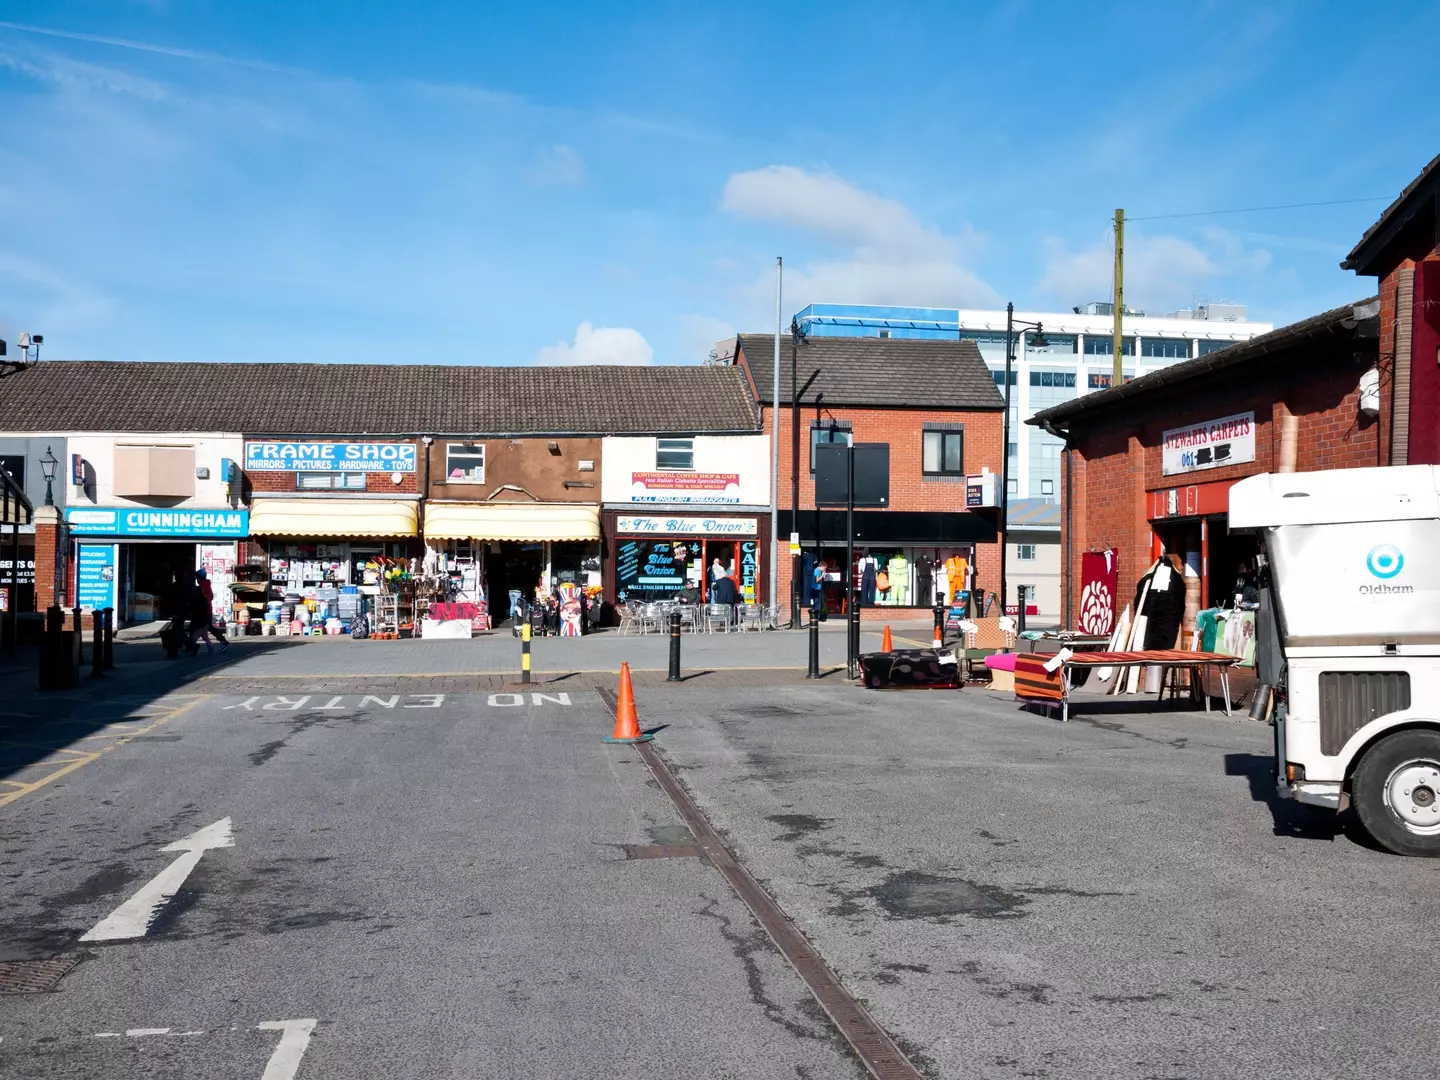 Oldham is among the poorest areas in England.